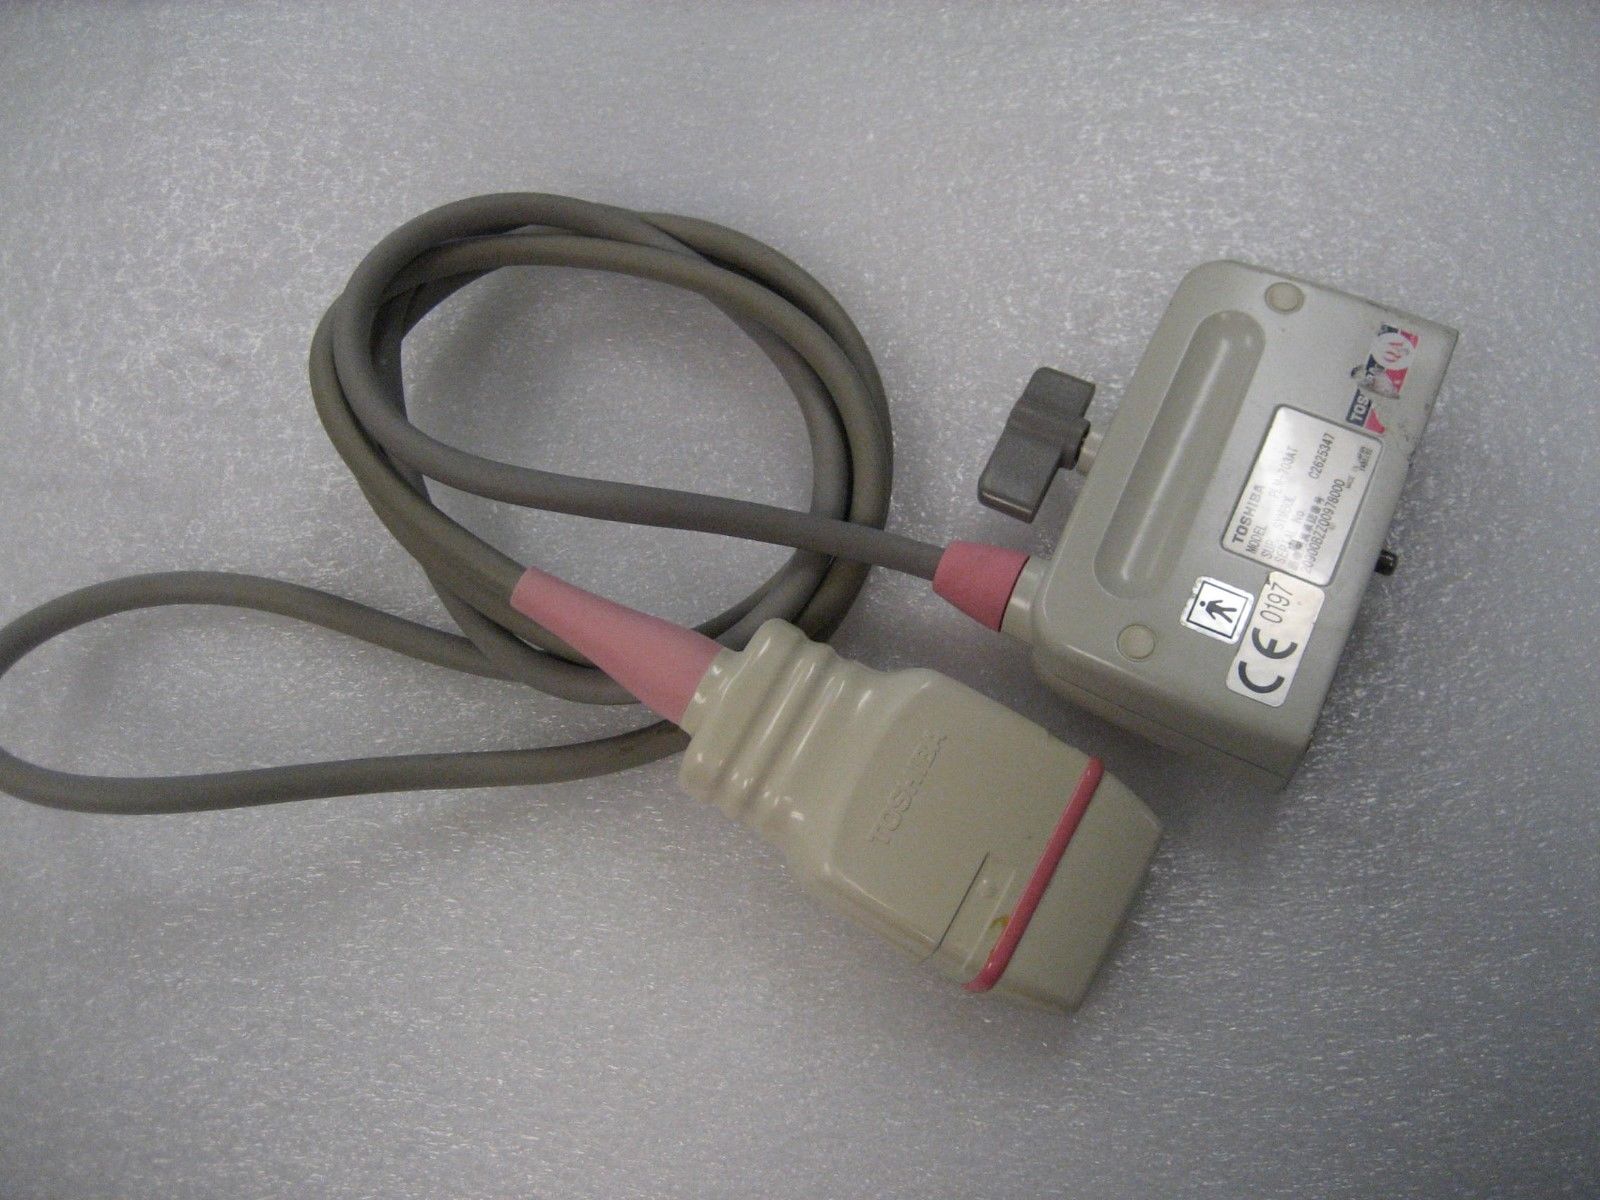 TOSHIBA PLM-703AT Linear Ultrasound Probe.(works good ) DIAGNOSTIC ULTRASOUND MACHINES FOR SALE